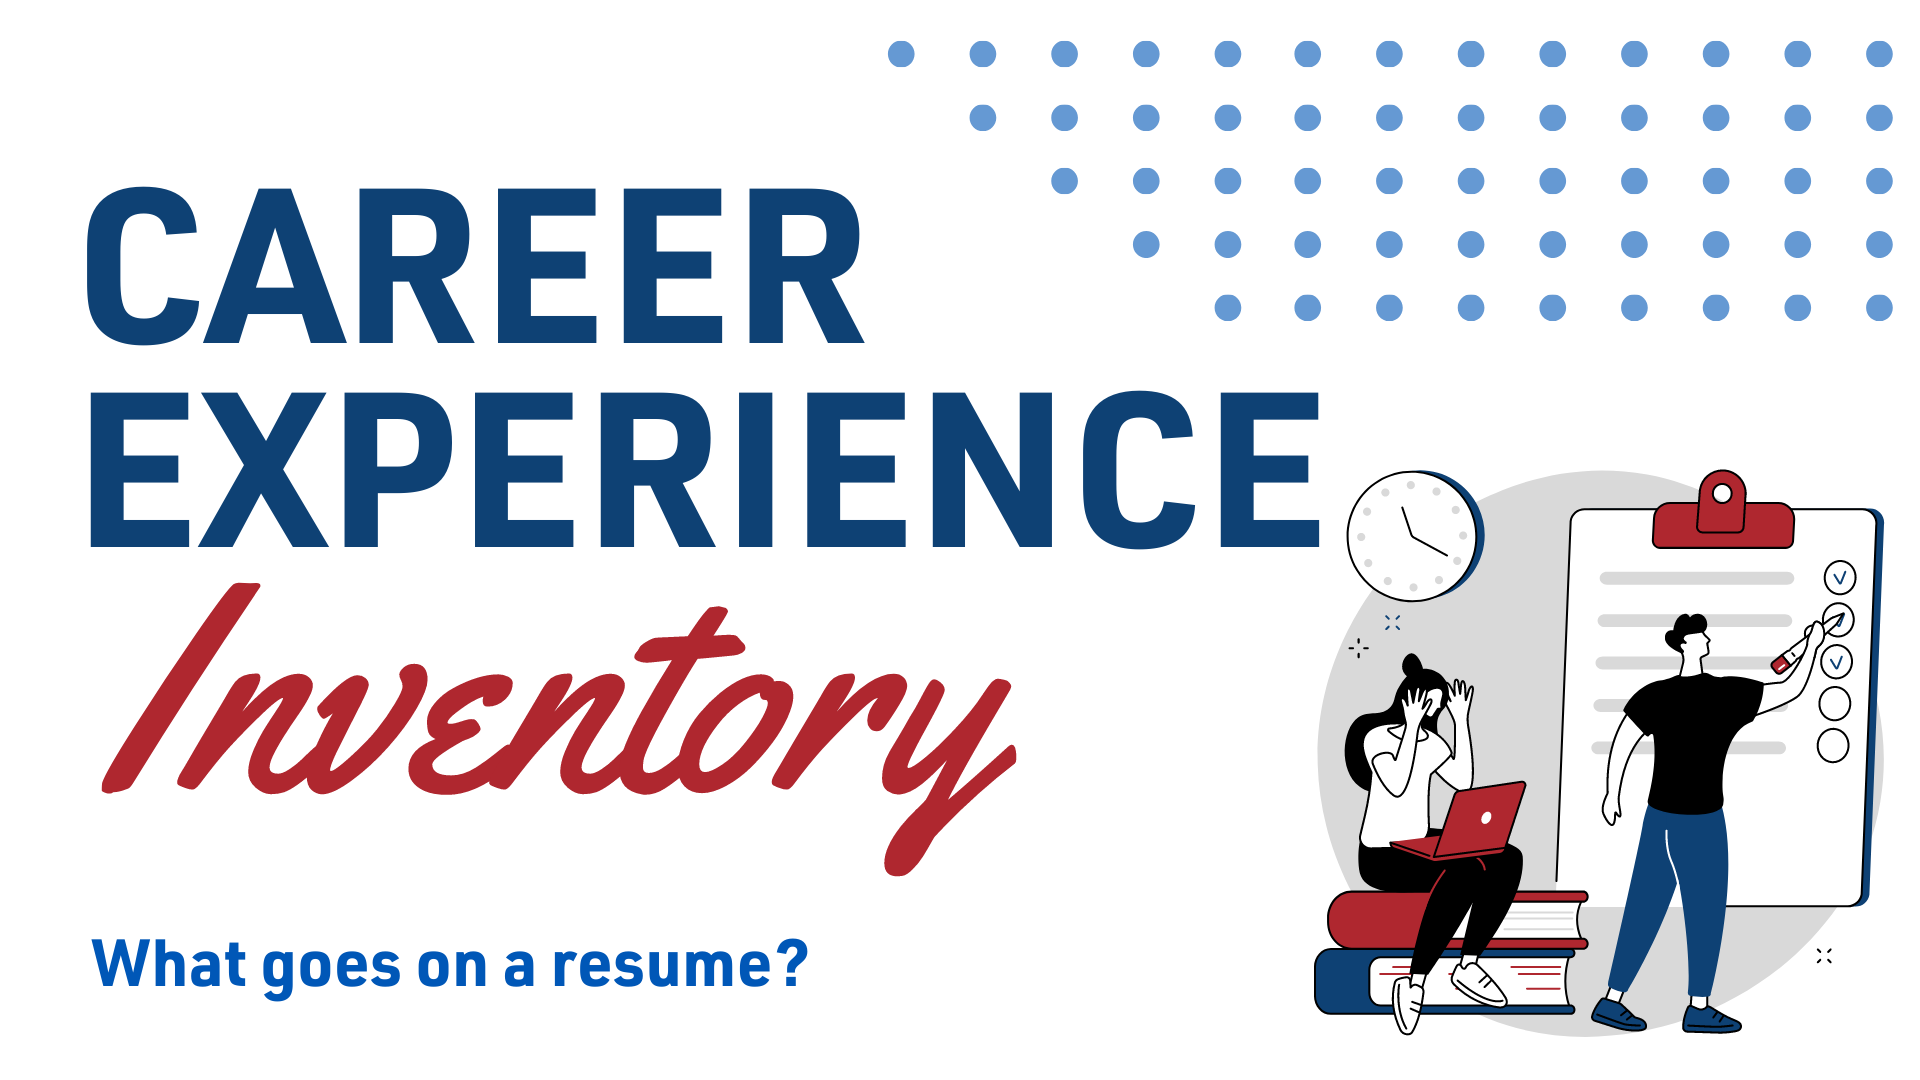 Career Experience Inventory